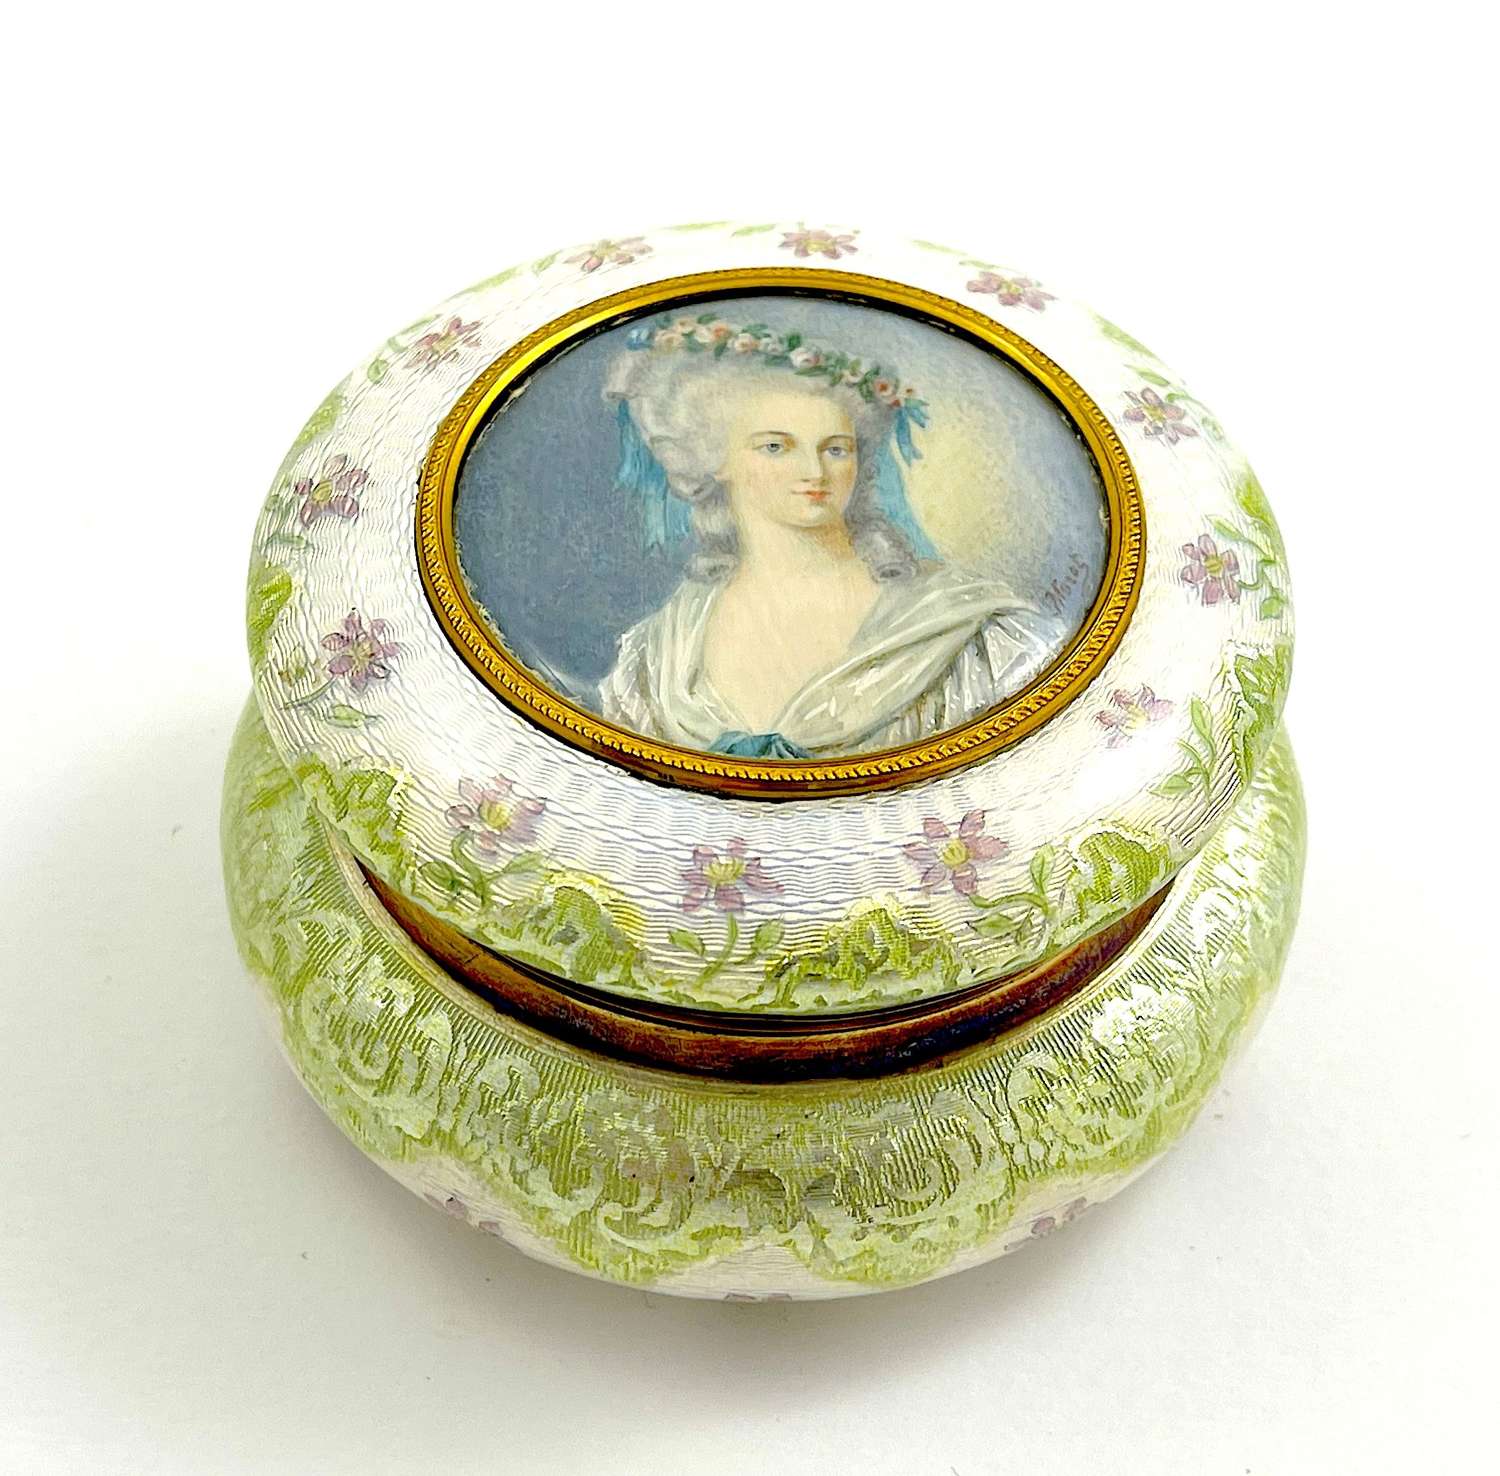 High Quality French Enamel Box with Signed Portrait